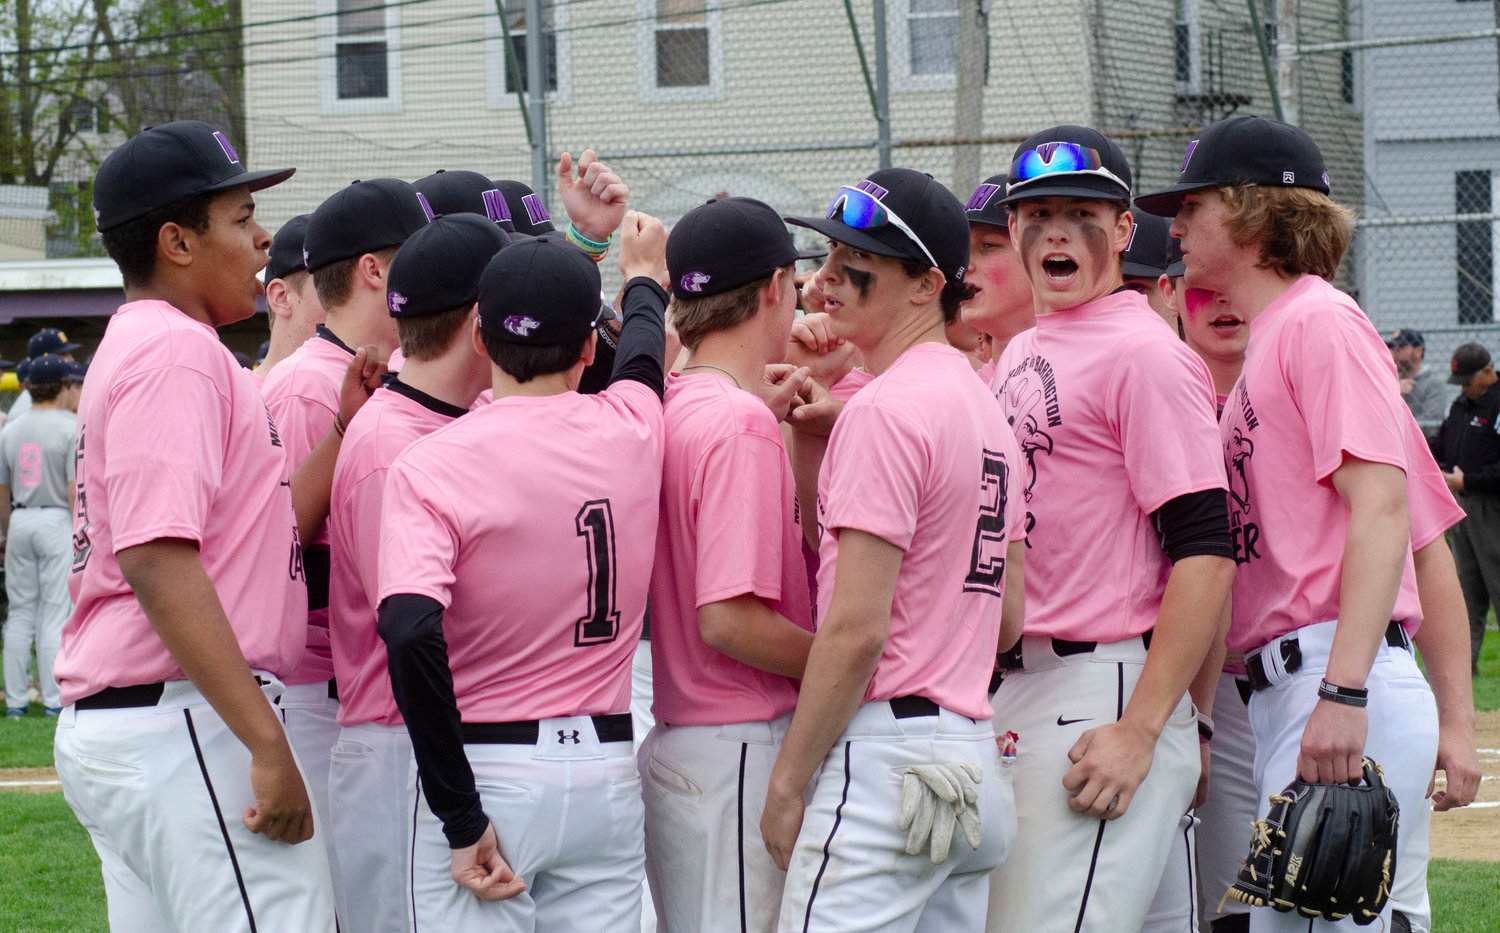 Matt Gale (yelling at right) and the team break out of a huddle before taking the field in the first inning.